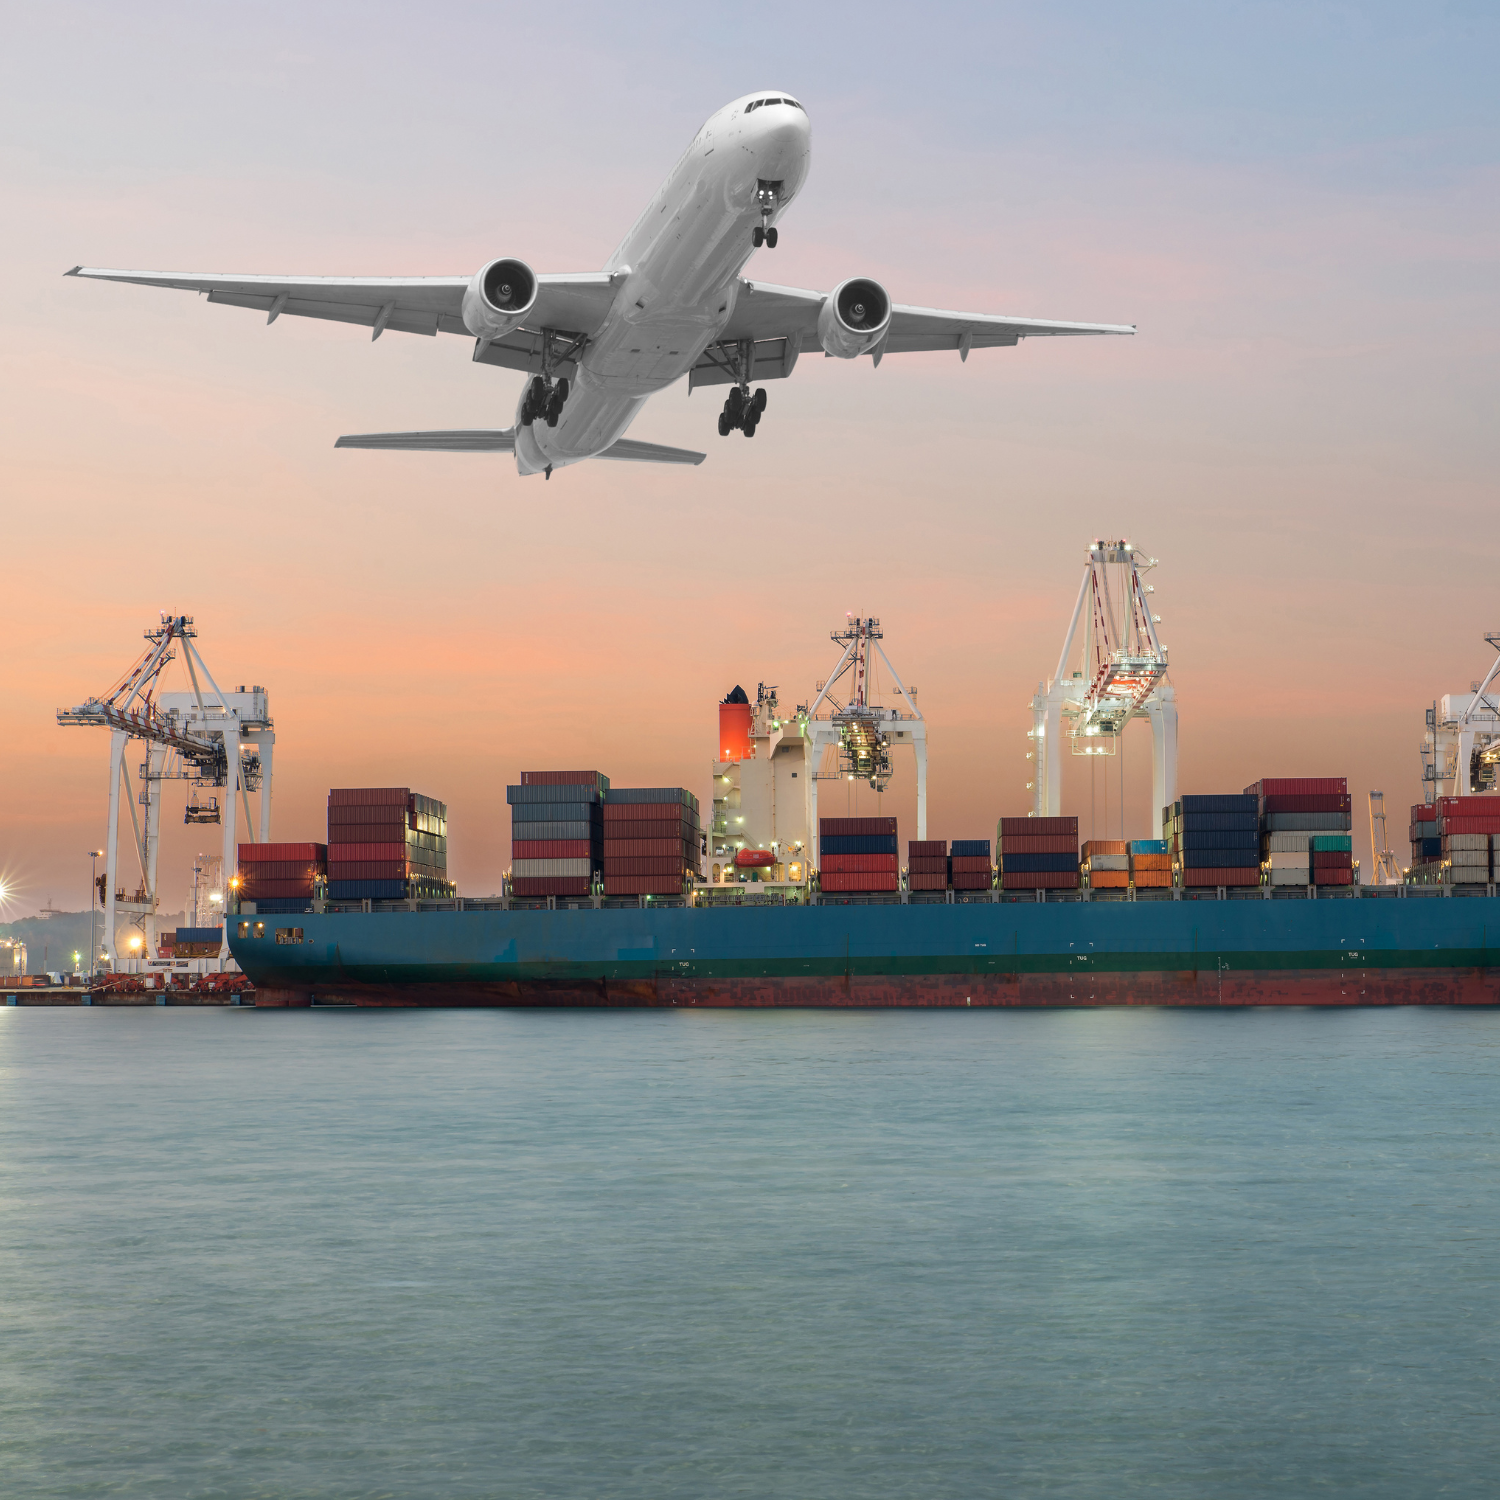 Sea Freight VS Air Freight: Which is Best for Your Business’s International Shipping?